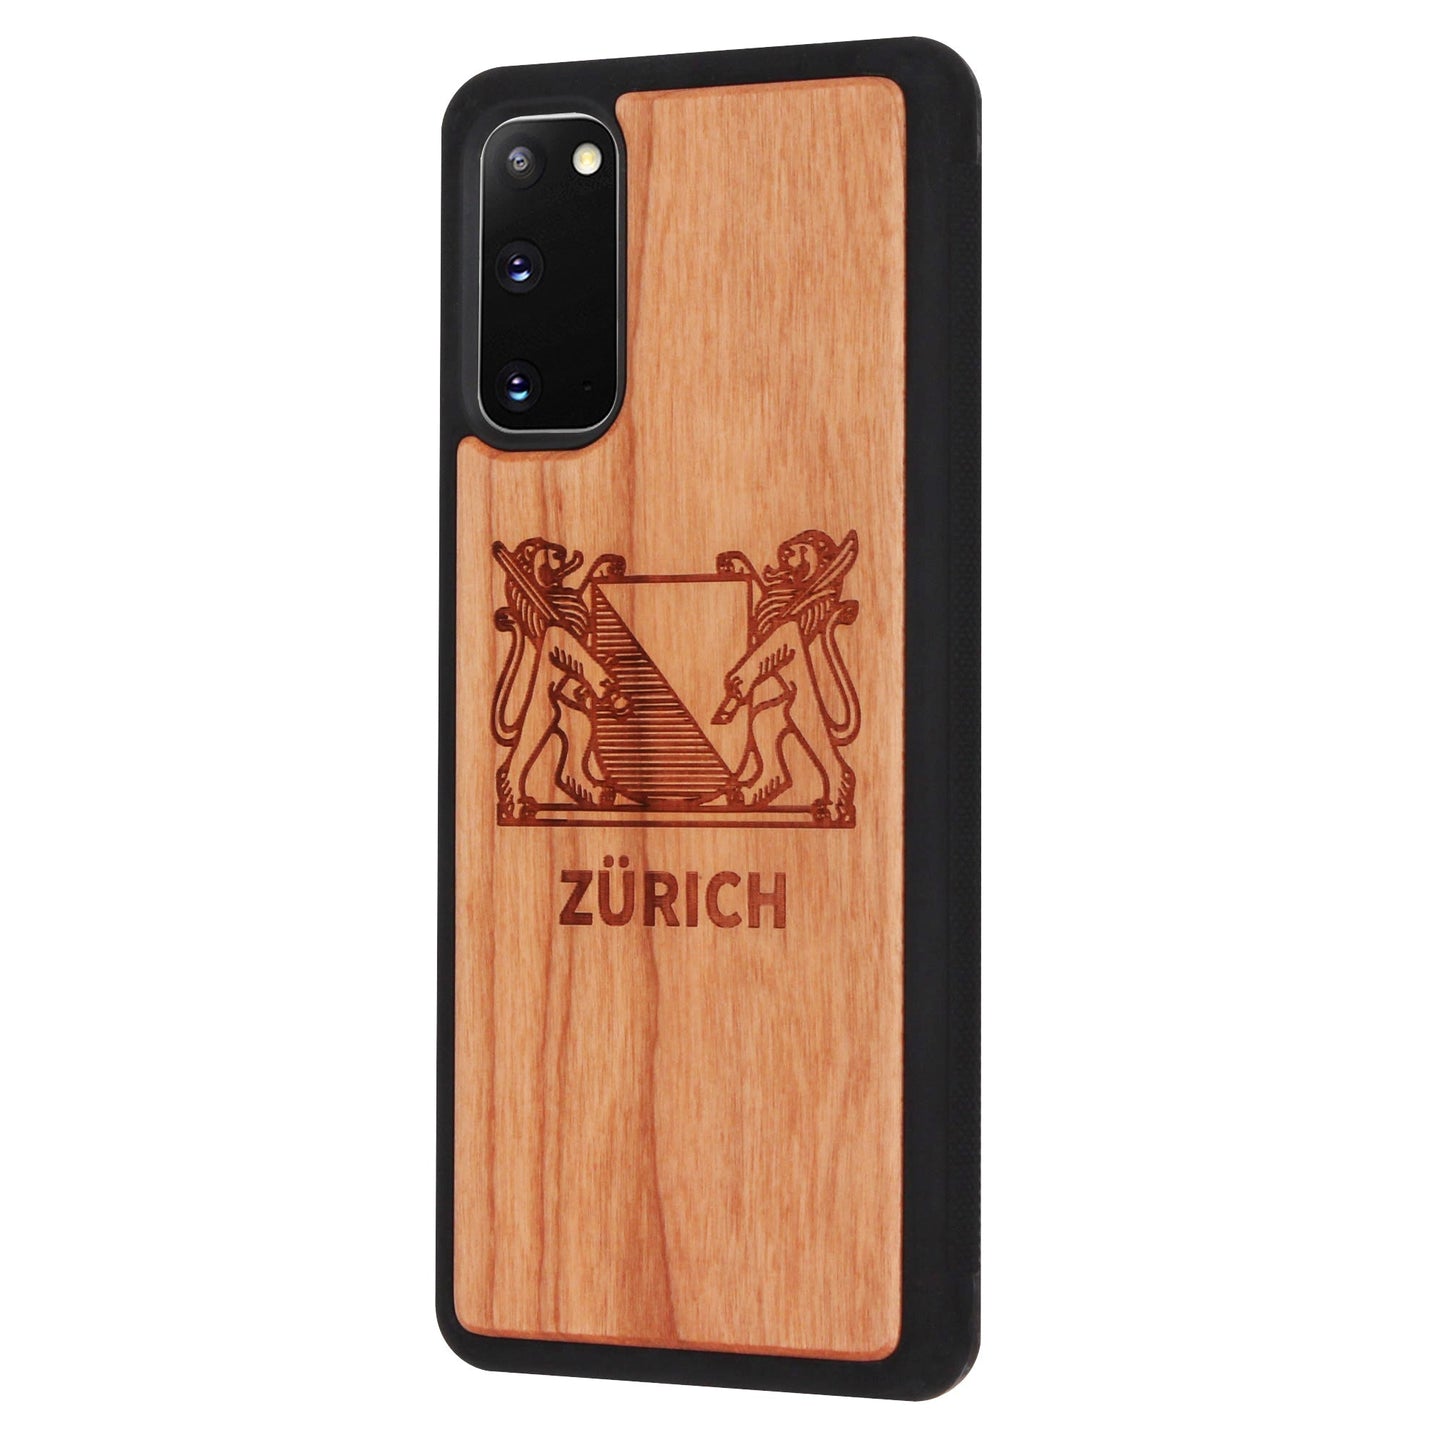 Zurich coat of arms Eden case made of cherry wood for Samsung Galaxy S20